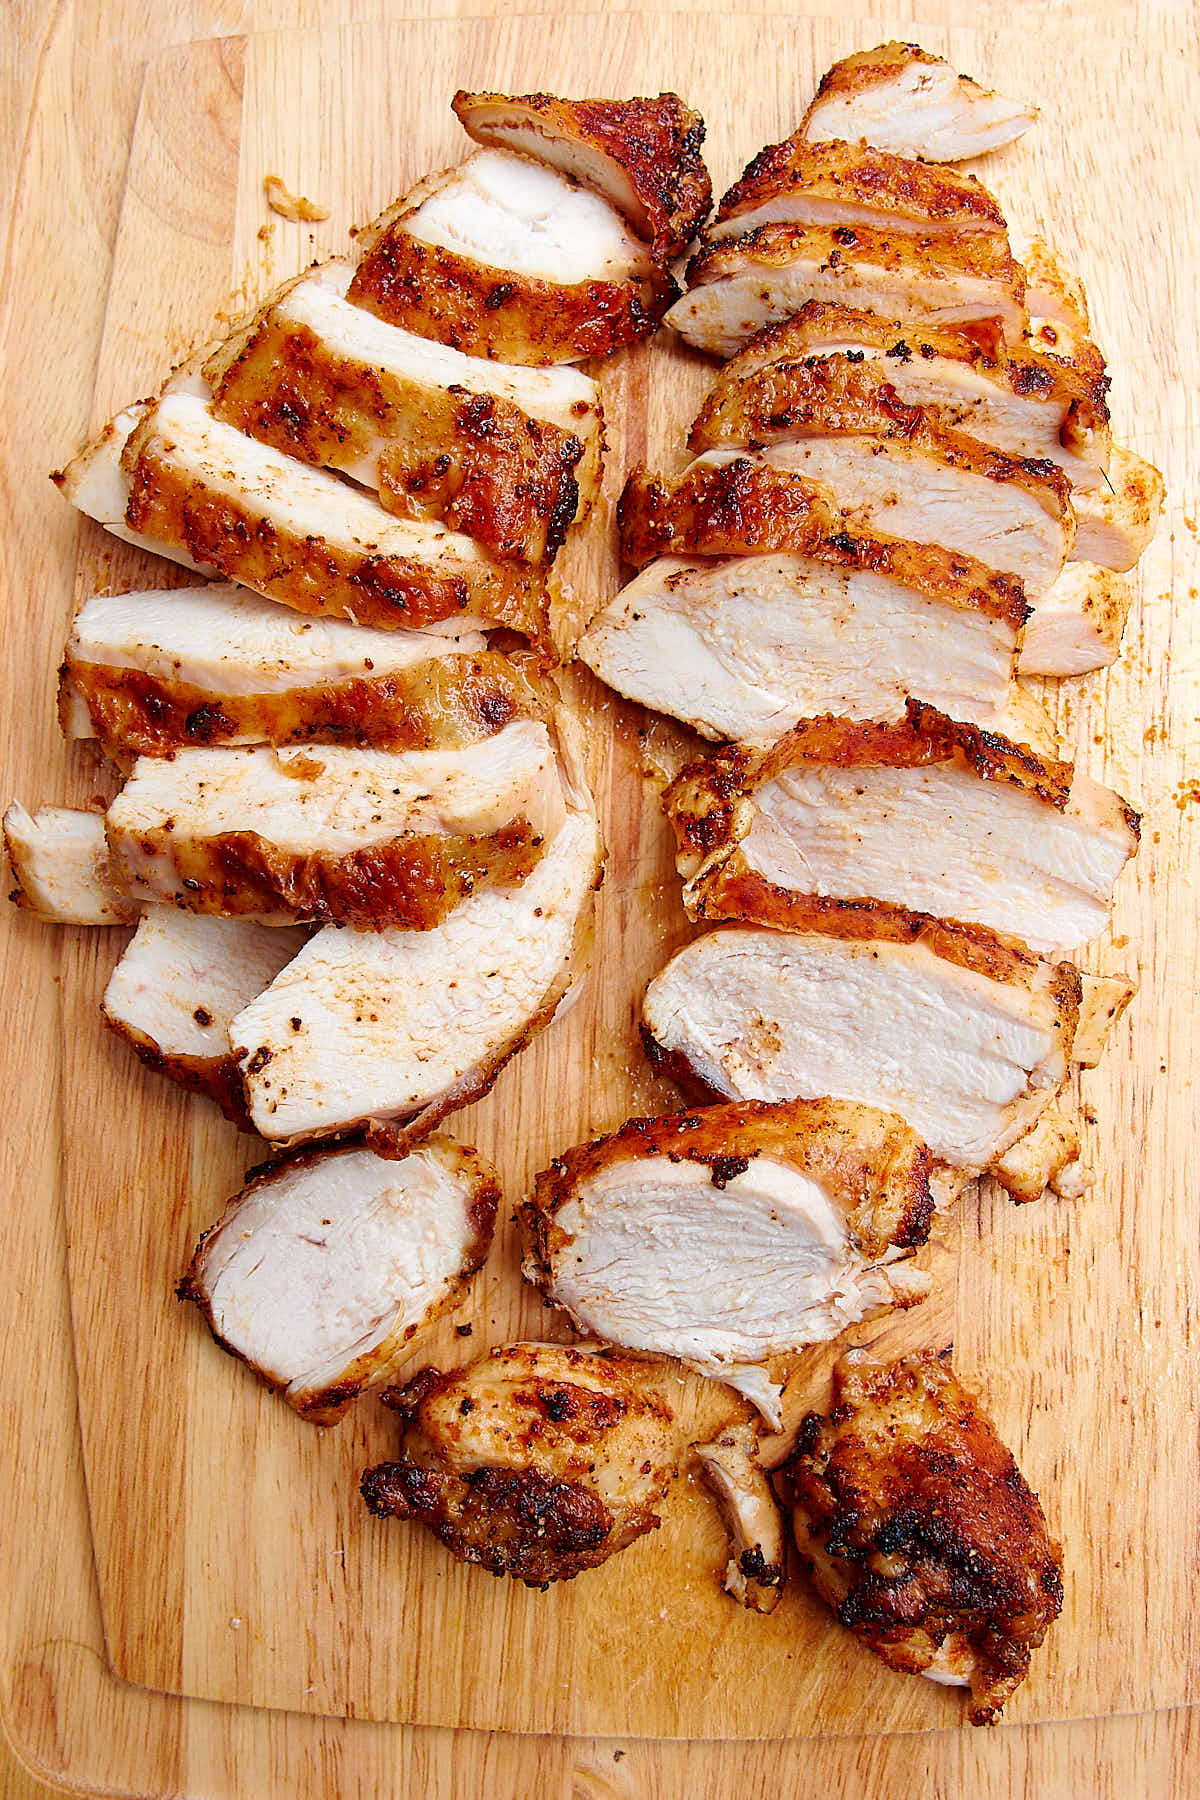 Air fried chicken breasts sliced into pieces on a bamboo cutting board, juices running off.